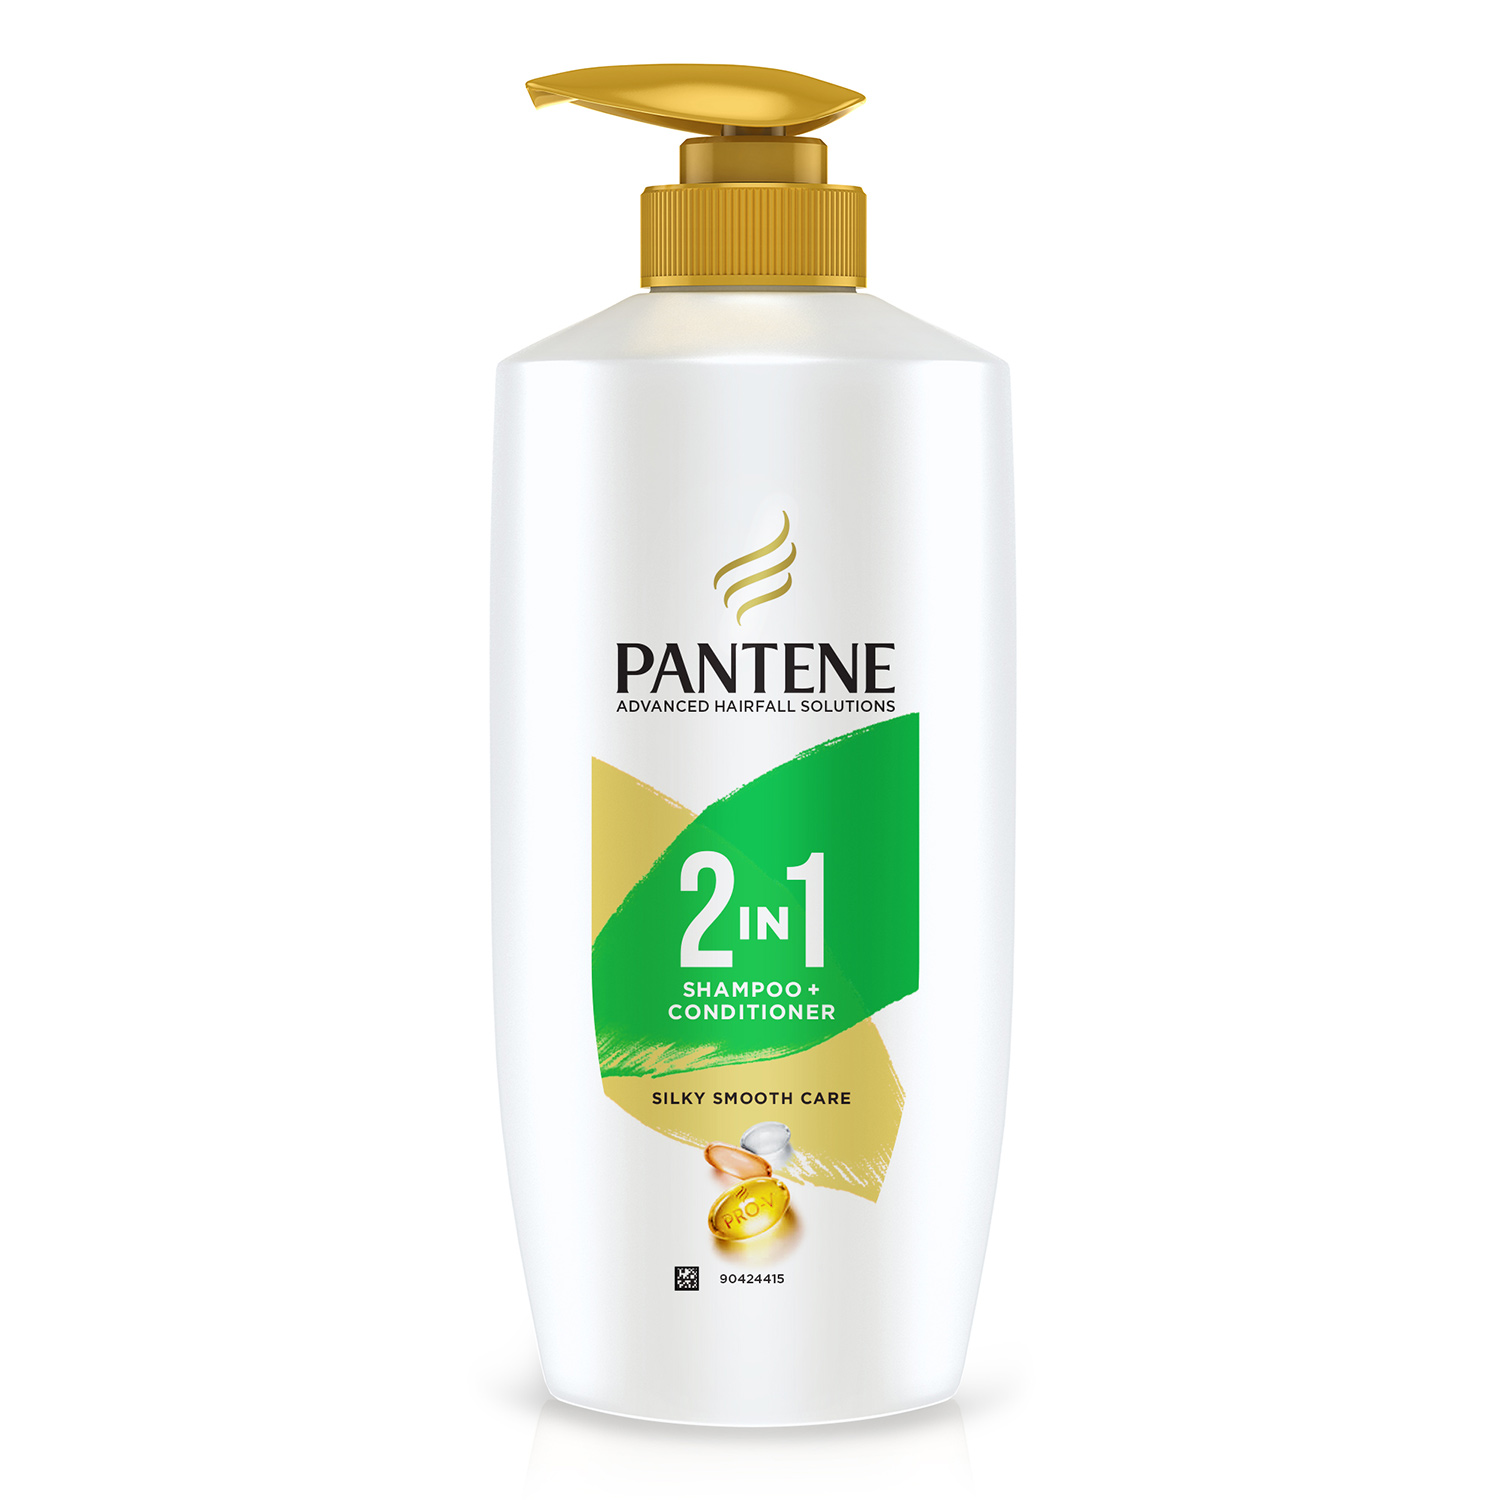 Pantene 2 in 1 Silky Smooth Care Shampoo + Conditioner